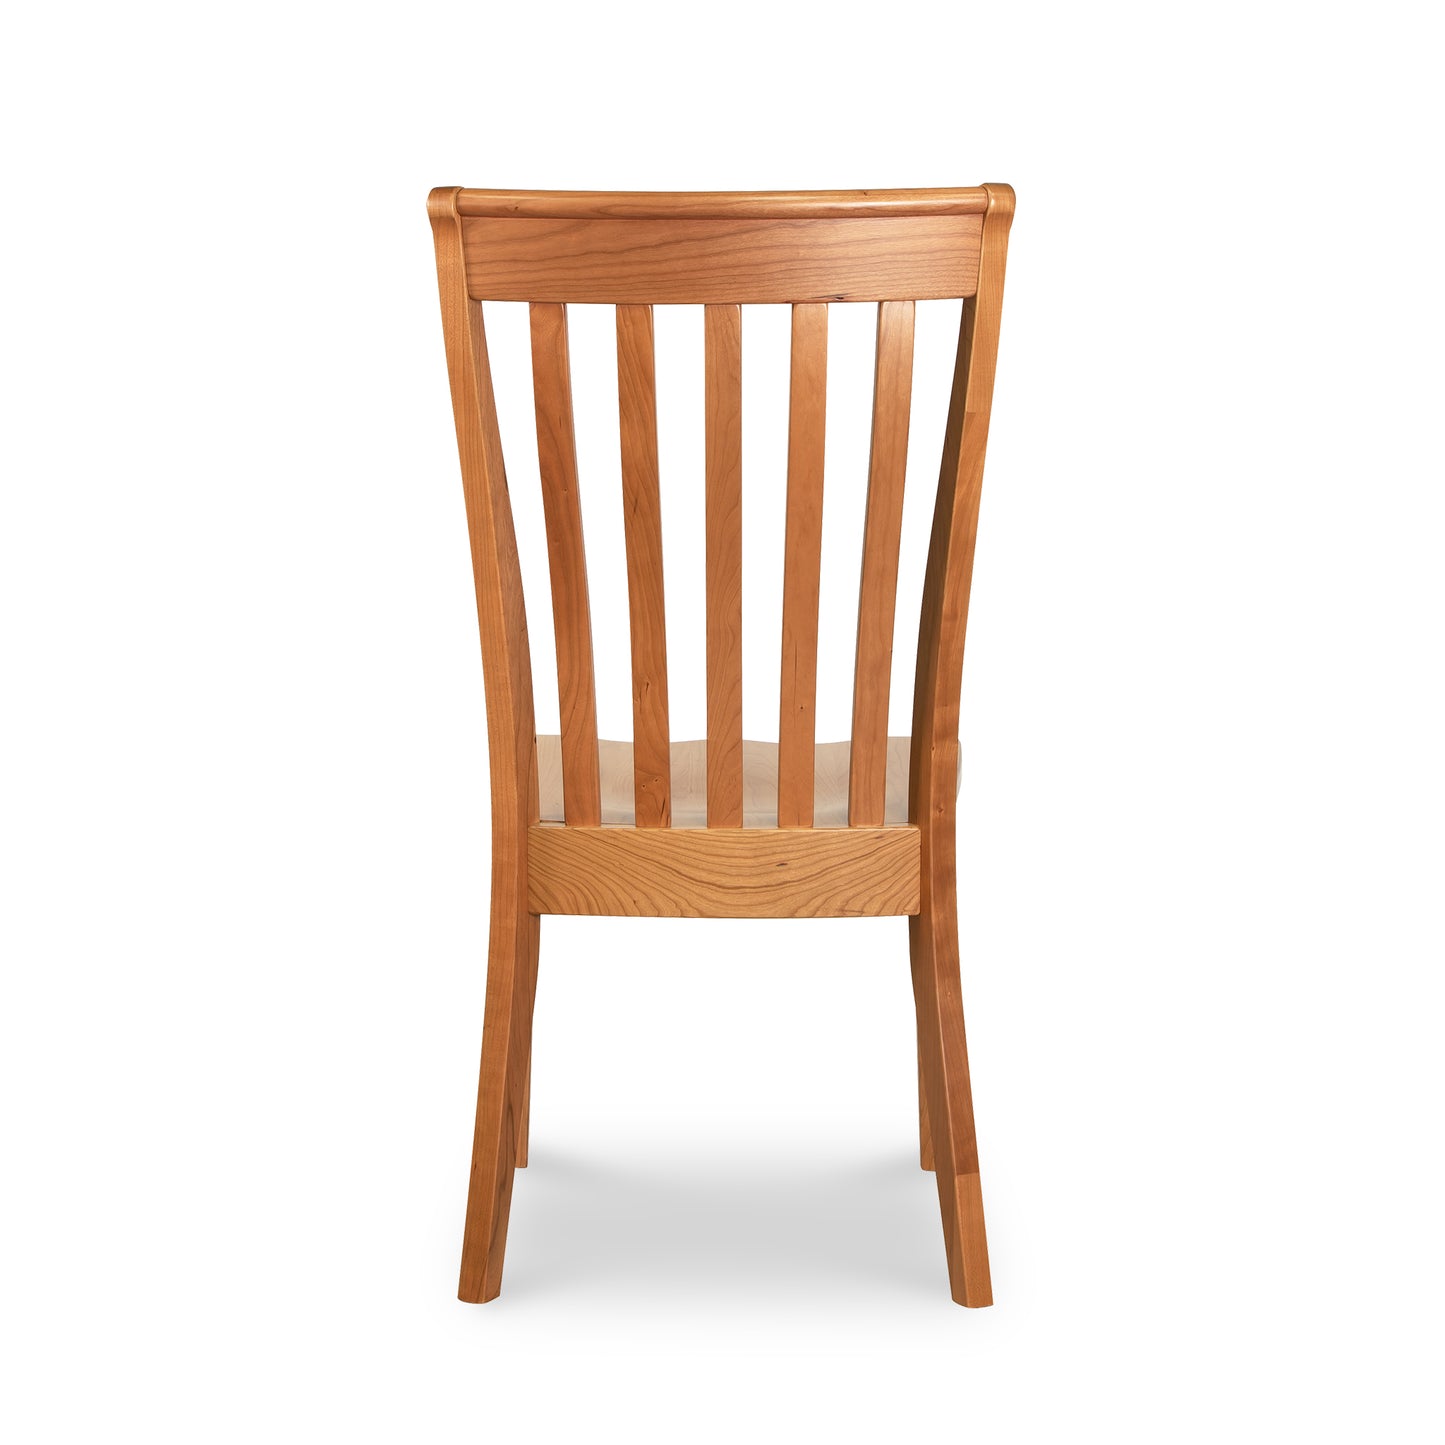 A Vermont Woods Studios Country Shaker Chair with Wood Seat against a plain white background. The chair features a smooth finish and is made of light brown oak.